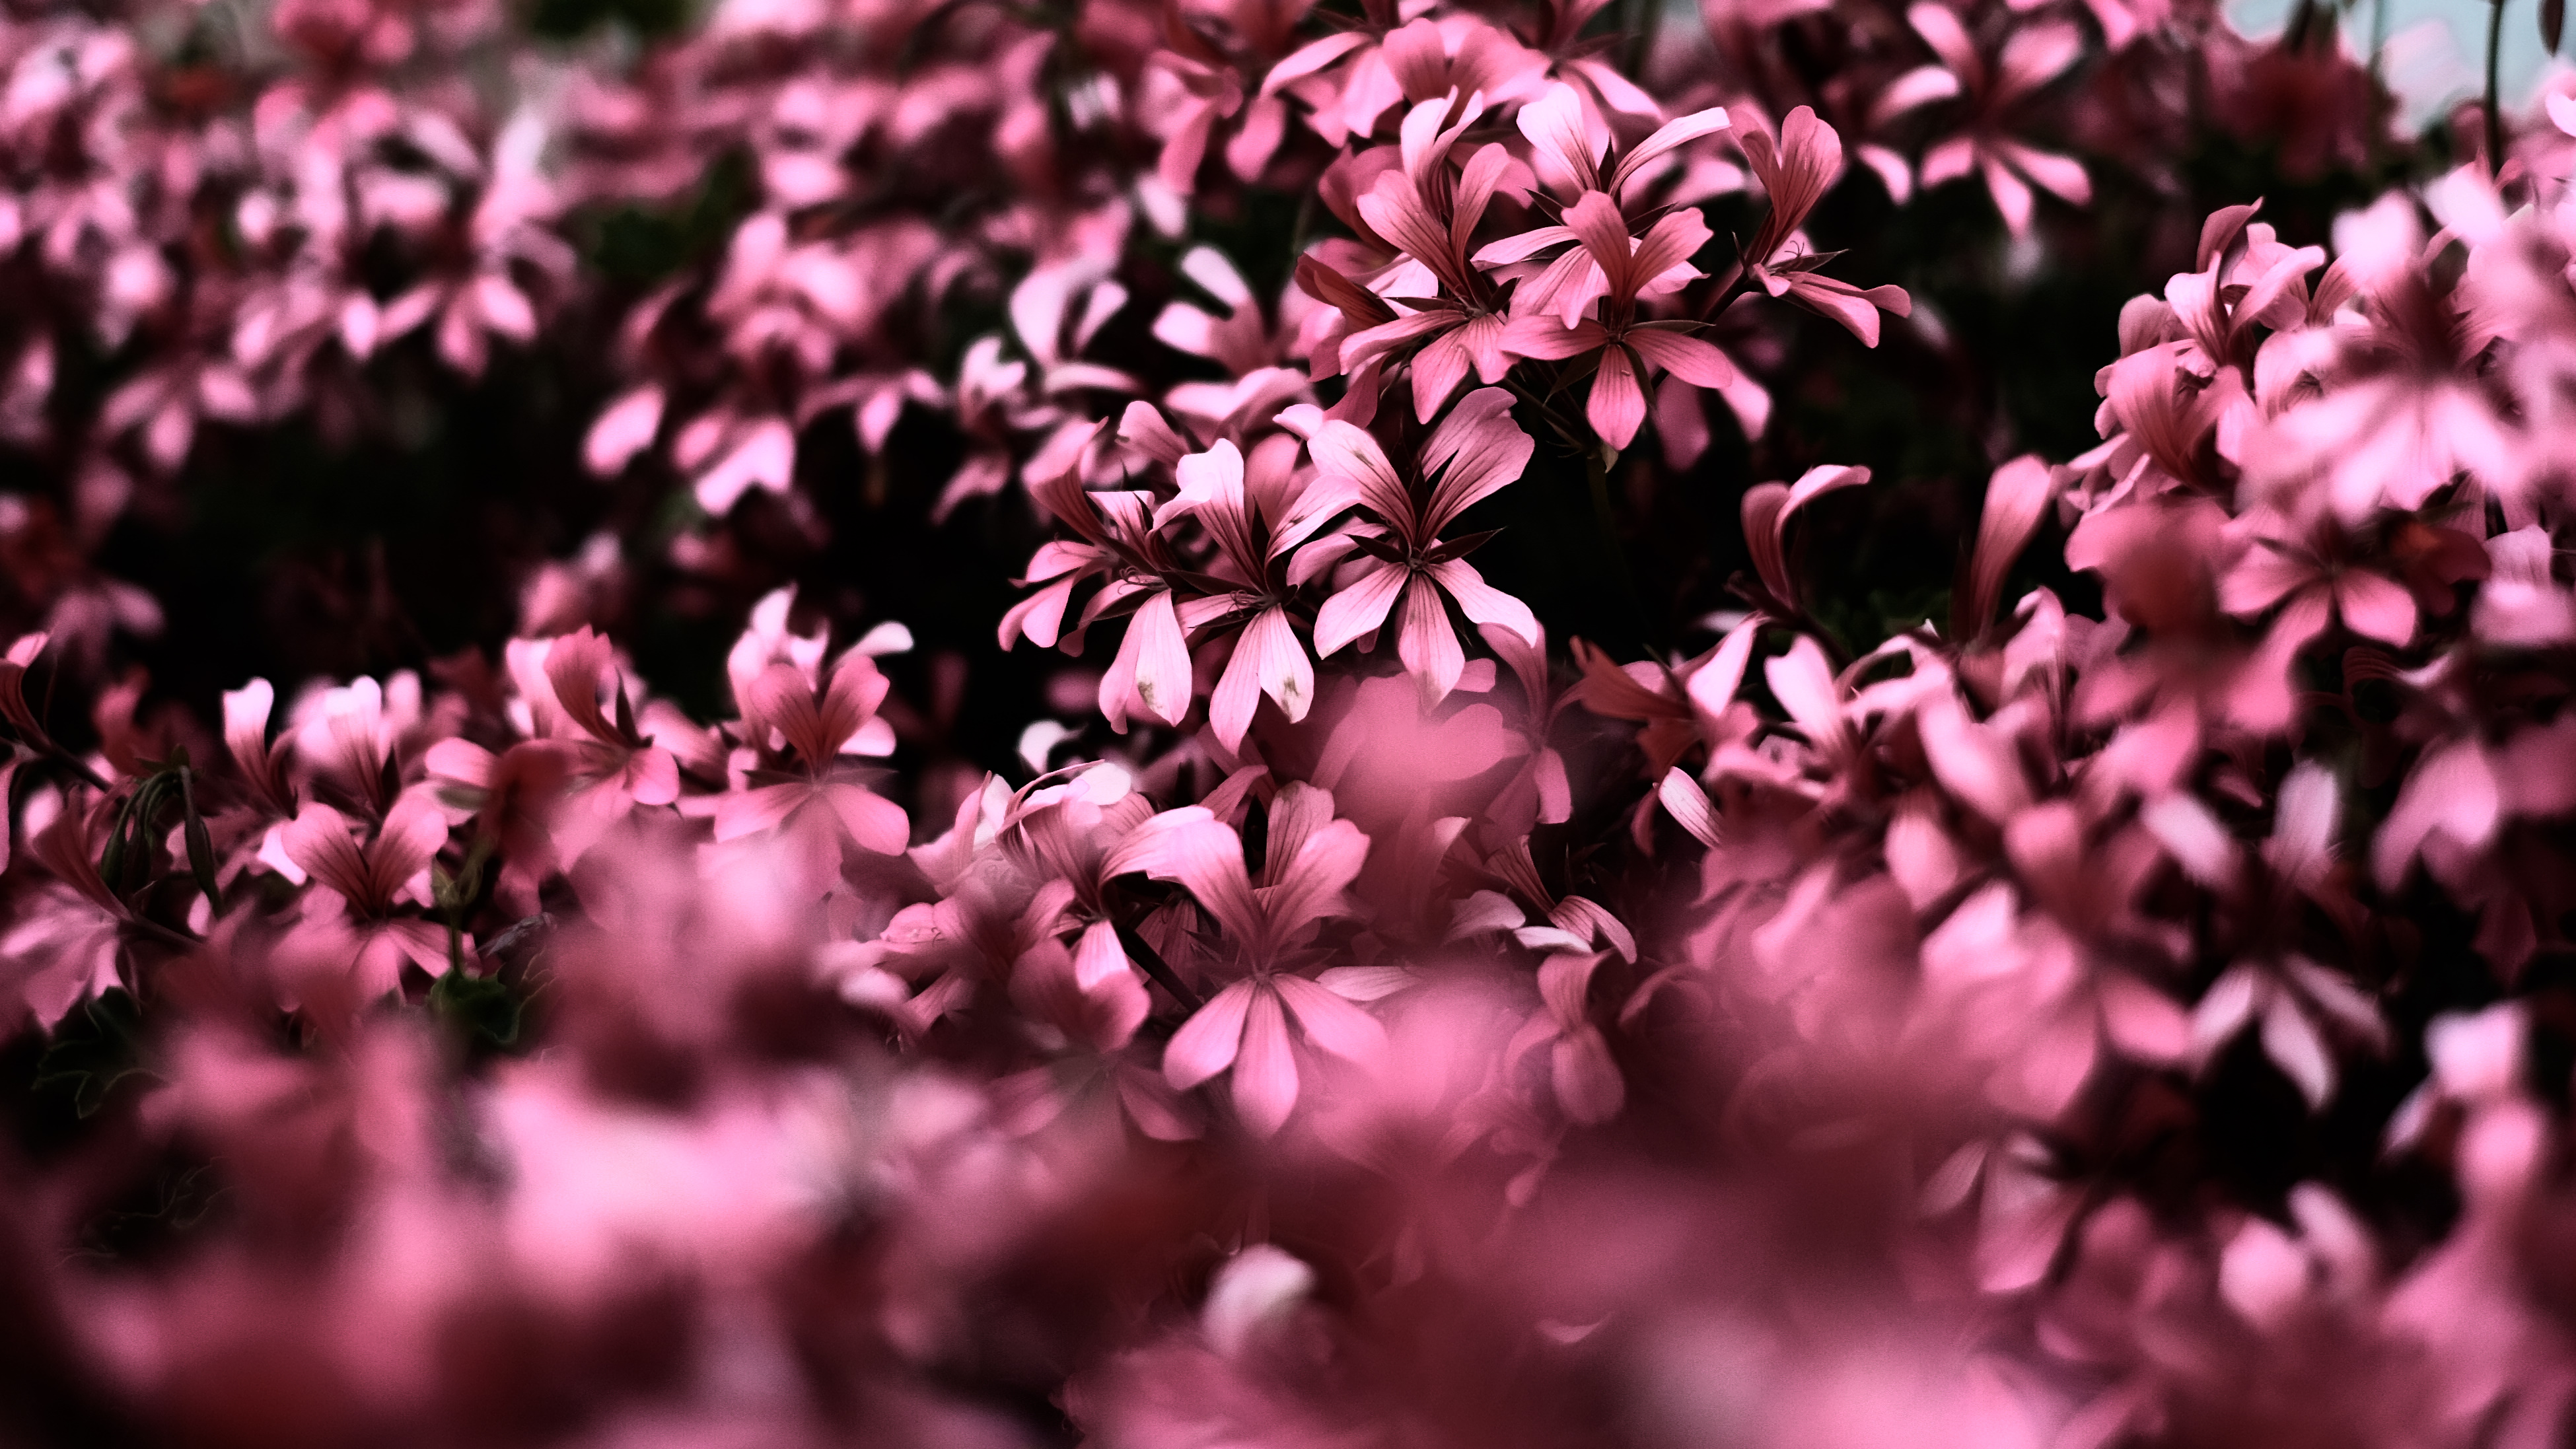 Pink Flowers Ultra HD Blur 4k, HD Flowers, 4k Wallpaper, Image, Background, Photo and Picture